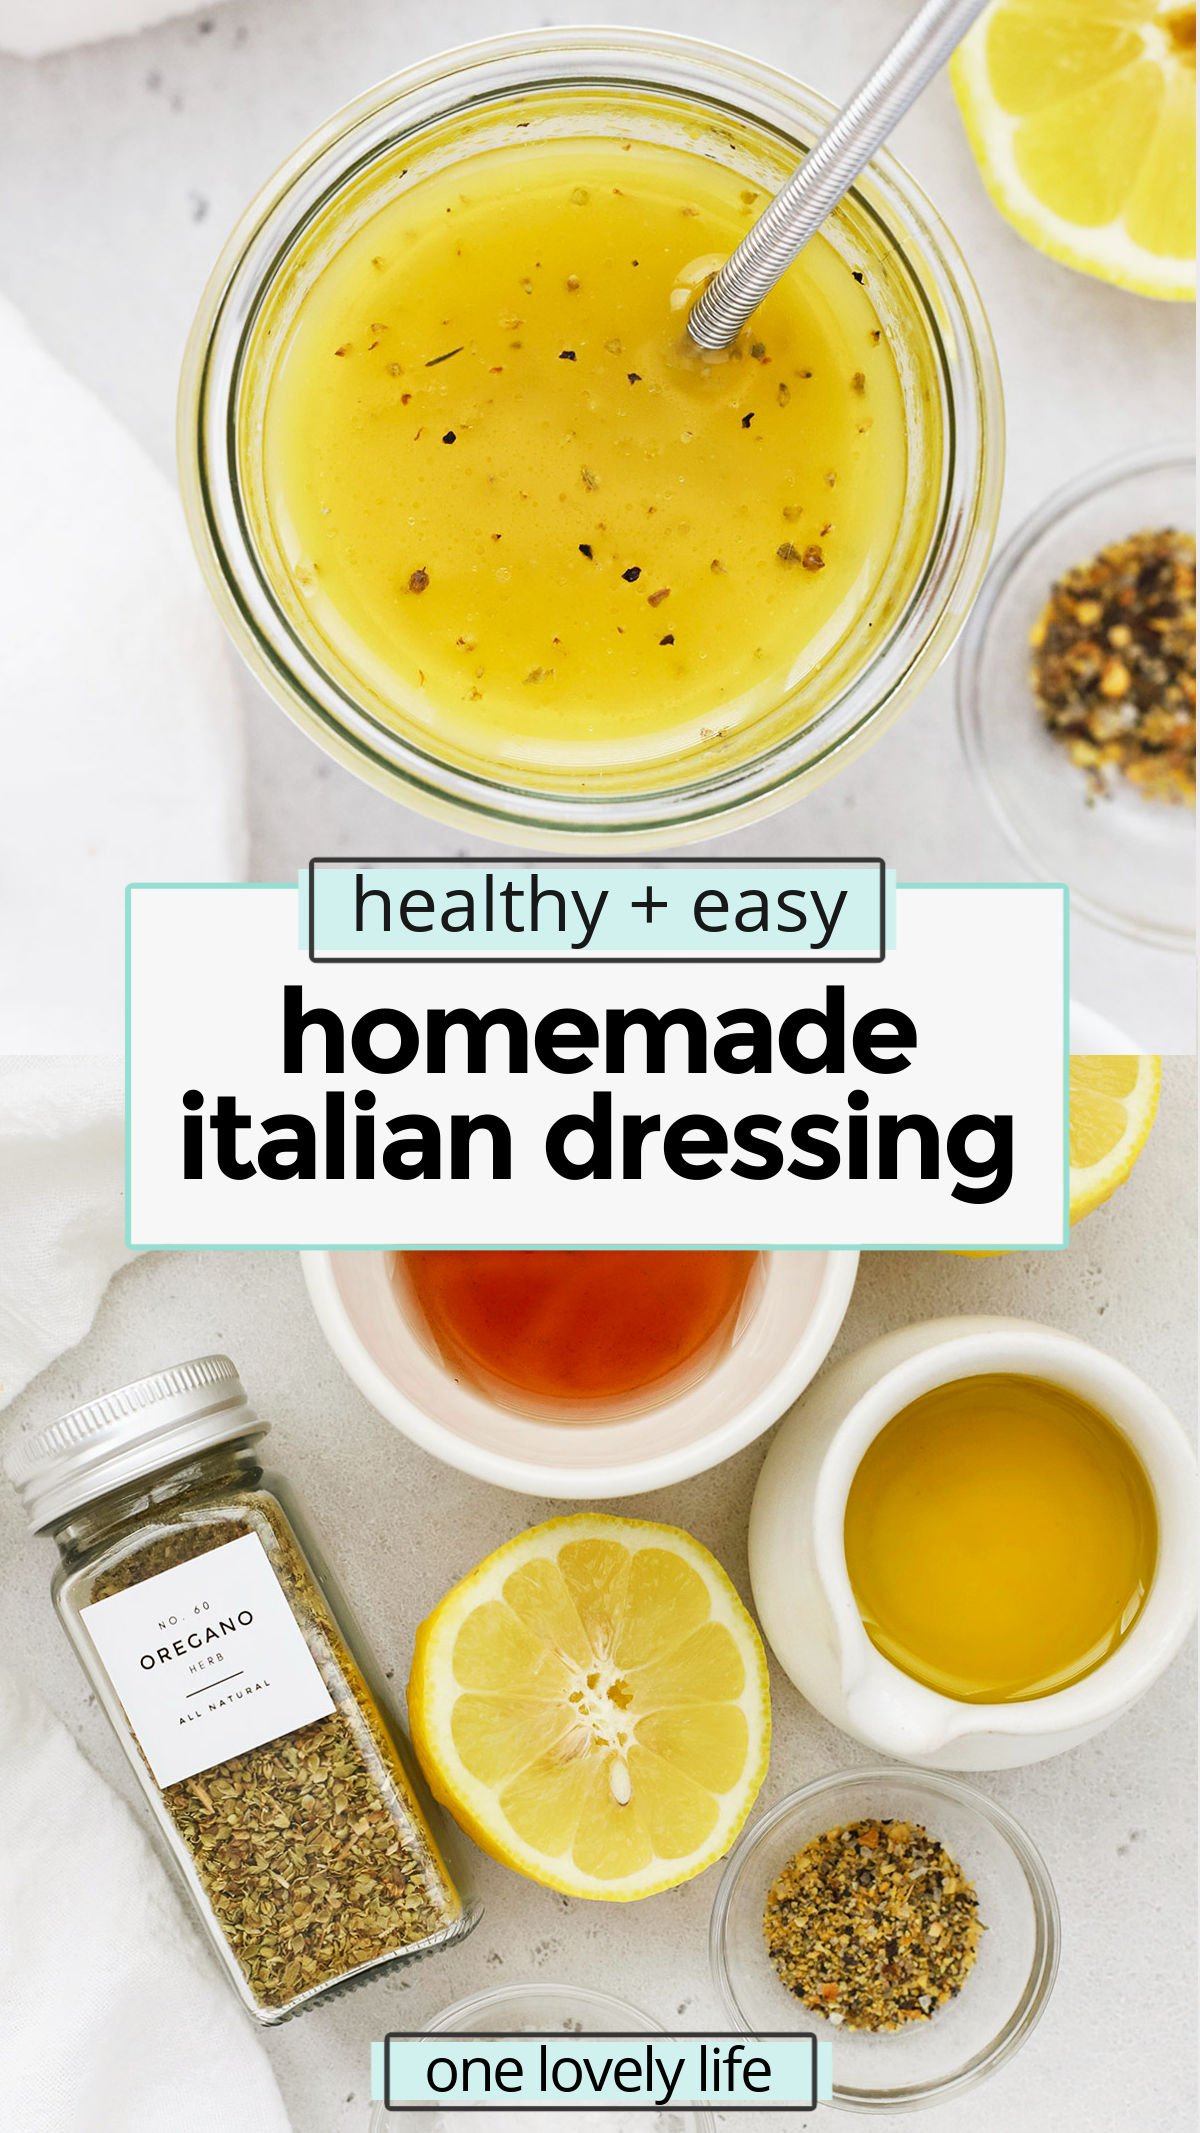 Easy Italian Dressing - this homemade Italian salad dressing recipe comes together in minutes and tastes amazing on salads, chicken, and more! // homemade salad dressing recipe / dairy free Italian salad dressing / paleo Italian salad dressing / gluten-free Italian salad dressing / healthy Italian salad dressing recipe / Mediterranean salad dressing recipe